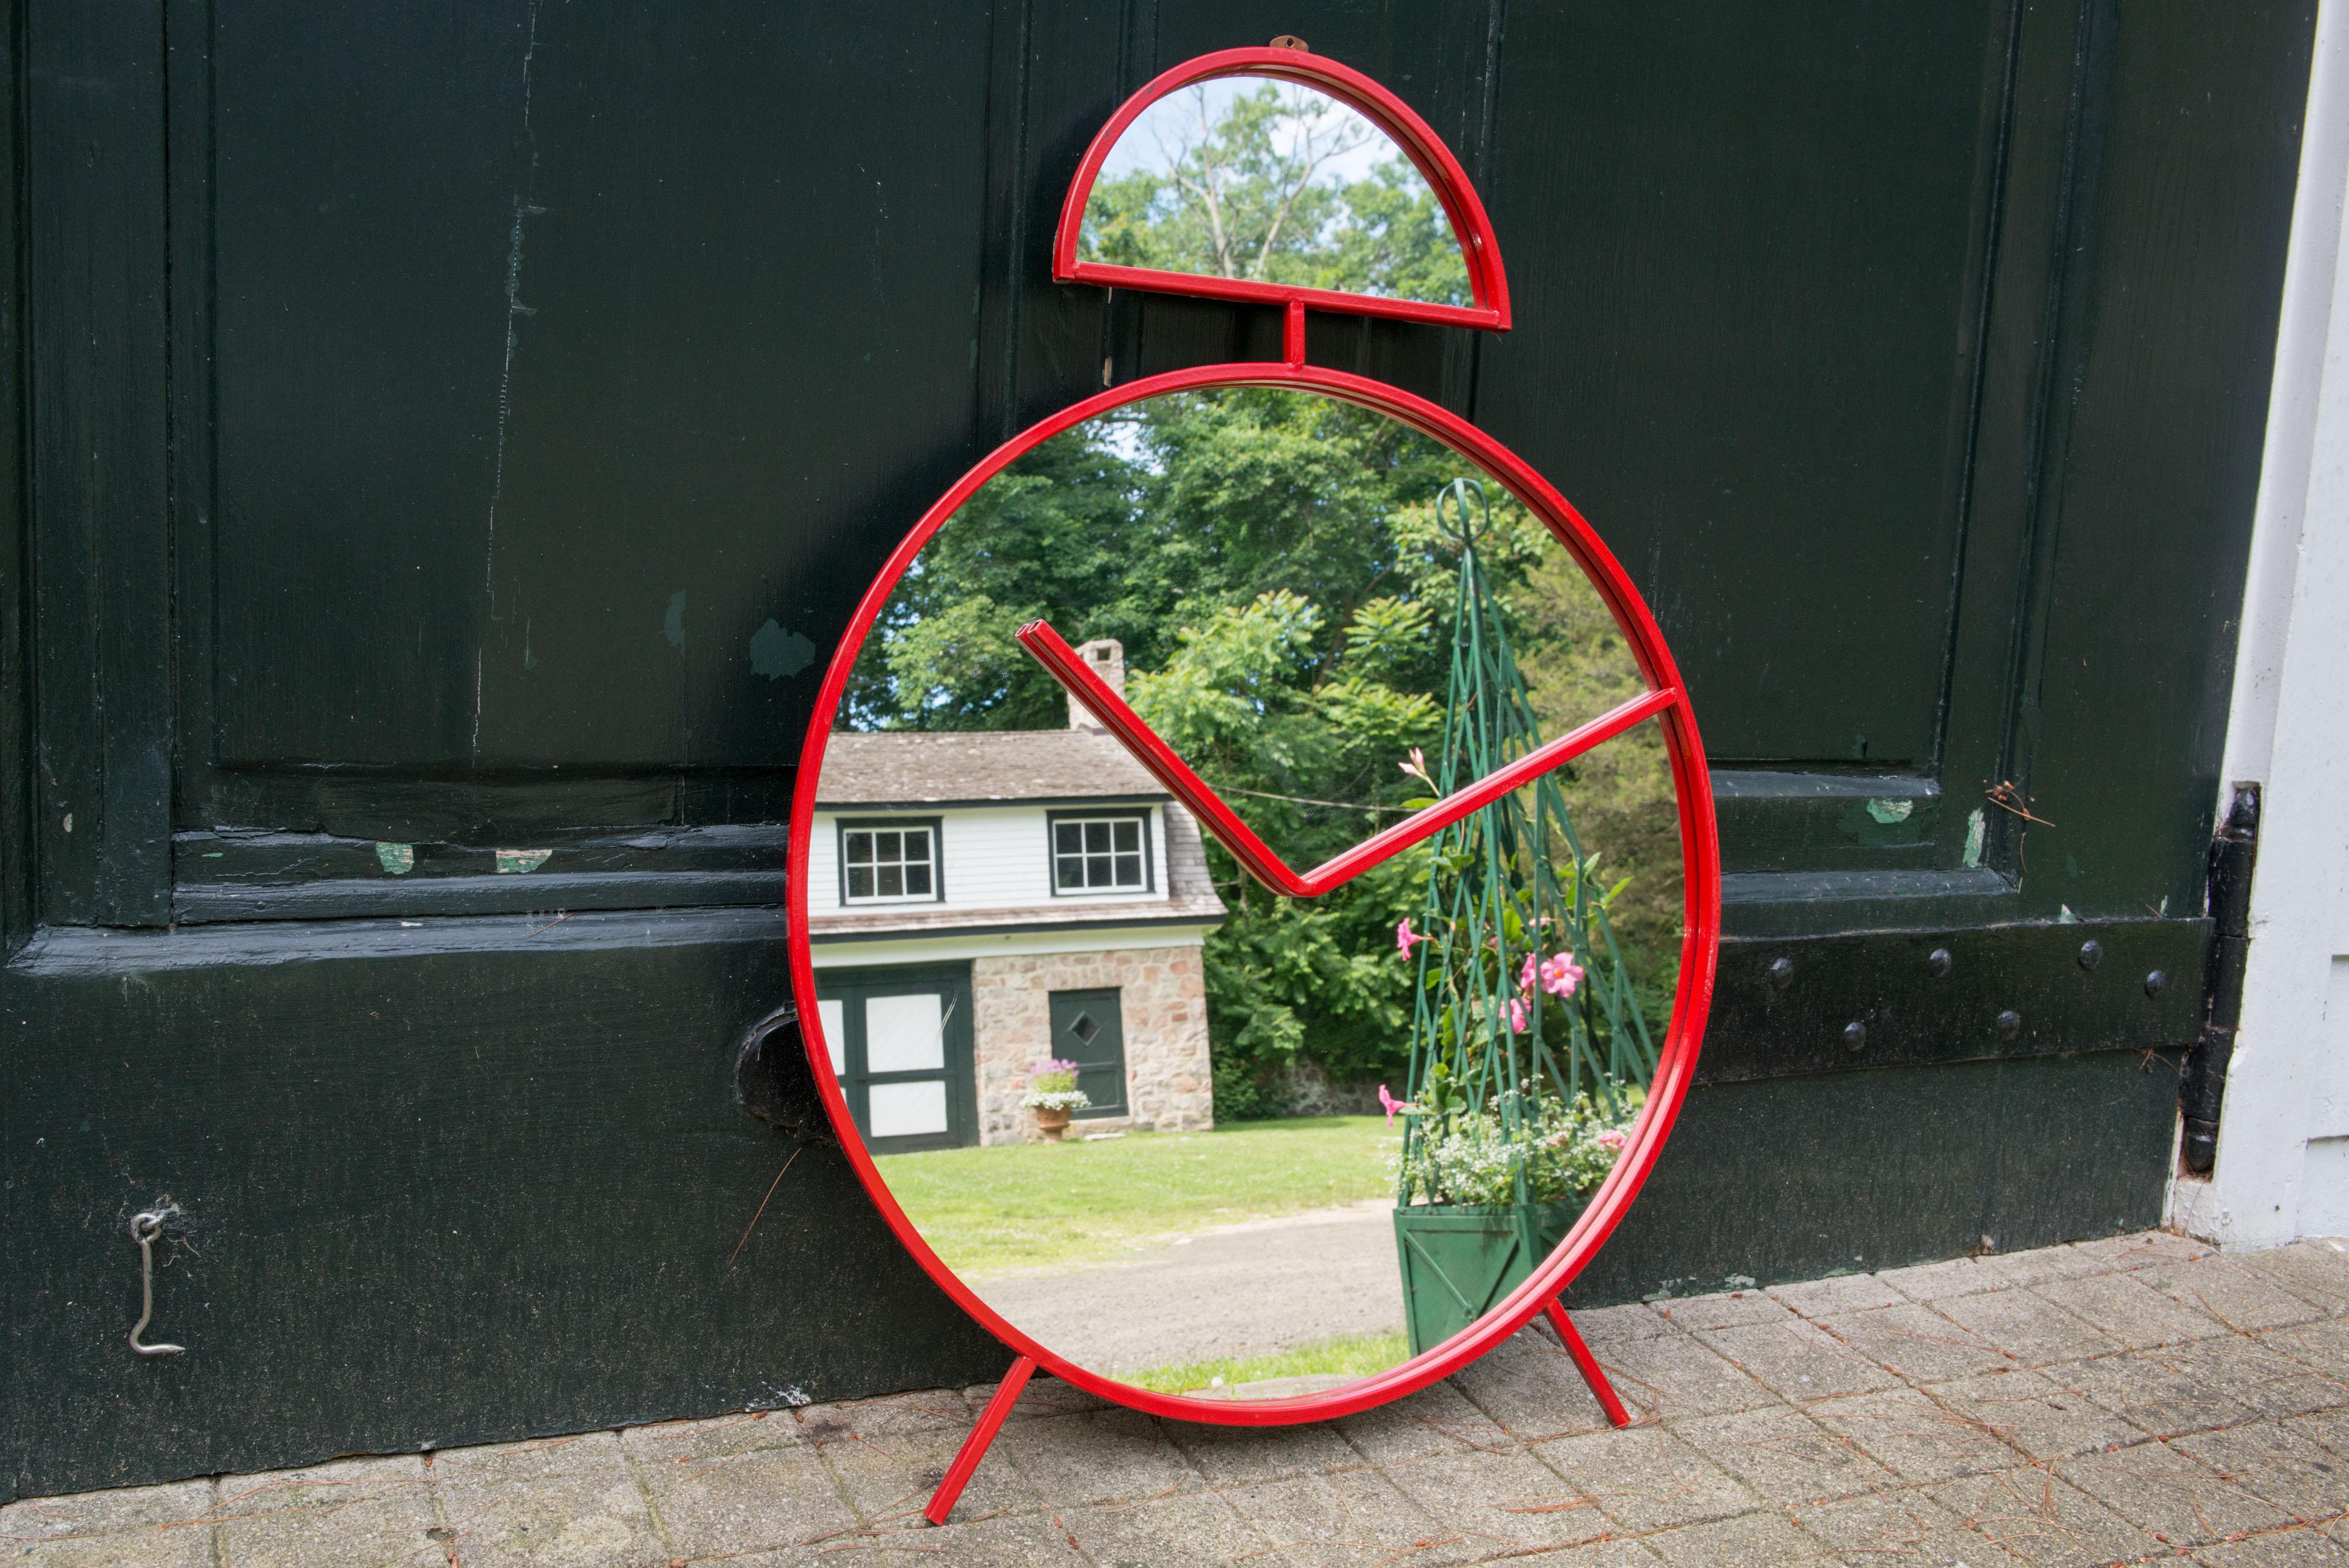 A very unusual and whimsical wall mirror in the shape of an alarm clock red lacquered metal. Made in Italy, marked Pilm.